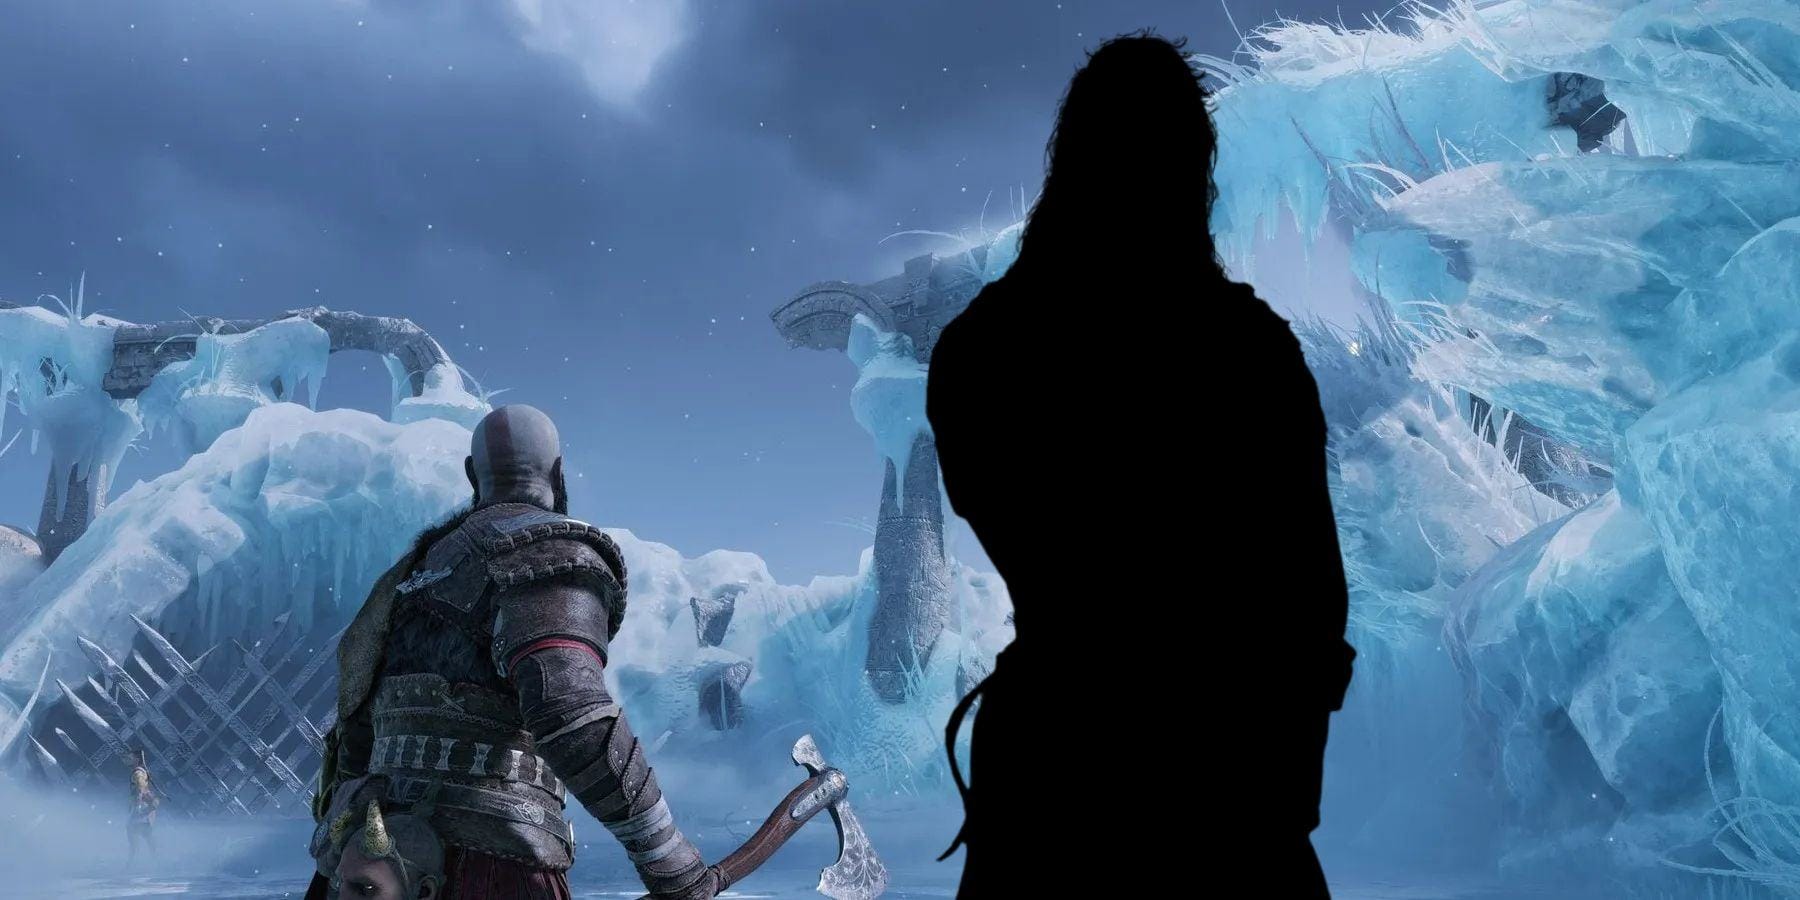 God of War Ragnarok's Kratos standing in the frozen landscape of Niflheim next to the silhouette of character that can be found there after the game's credits.